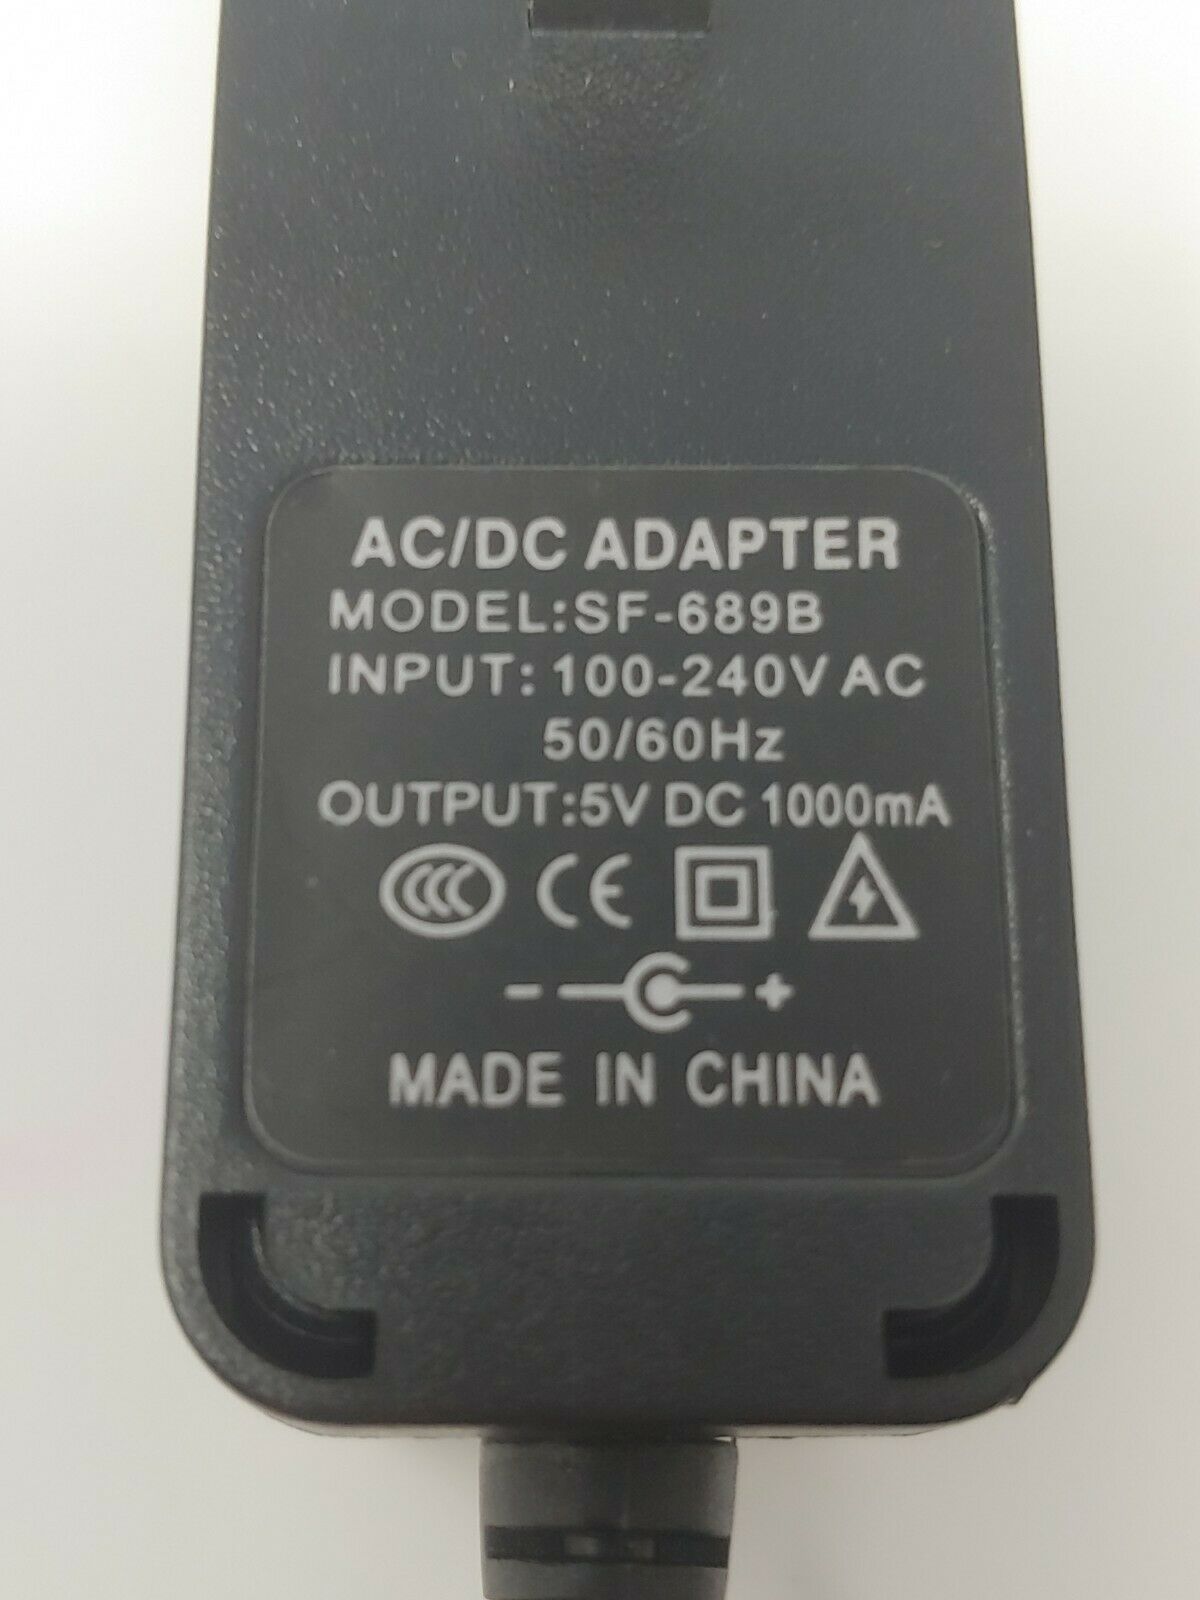 New 5V DC 1000mA AC Adapter For SF-689 SF-689B Power Supply Cord Wall Charger PSU - Click Image to Close